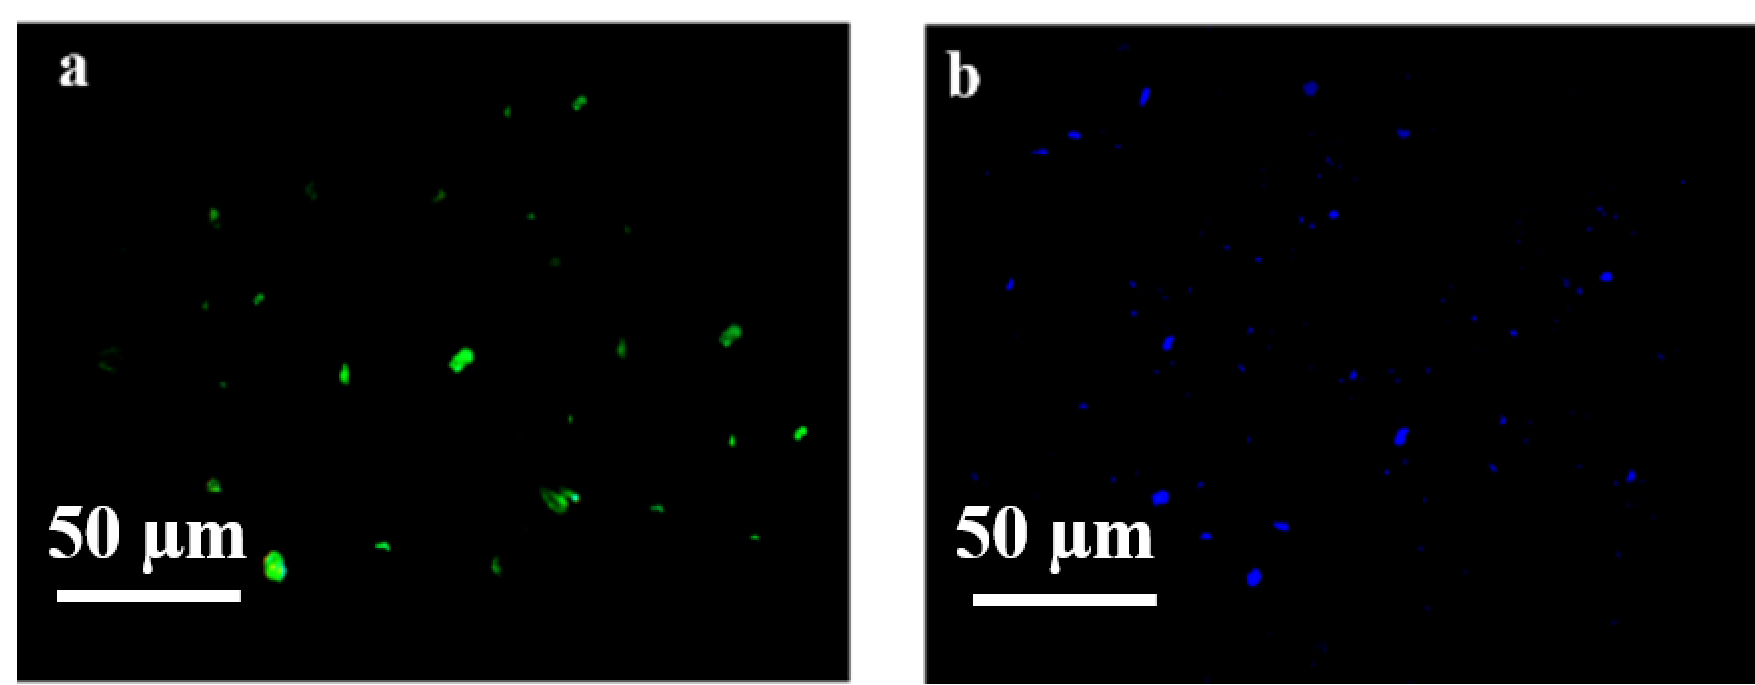 Figure 11. Fluorescence microscopy images of ZnO nanoparticle dispersed in PBS solution and the image was taken in a) green and b) blue filter.